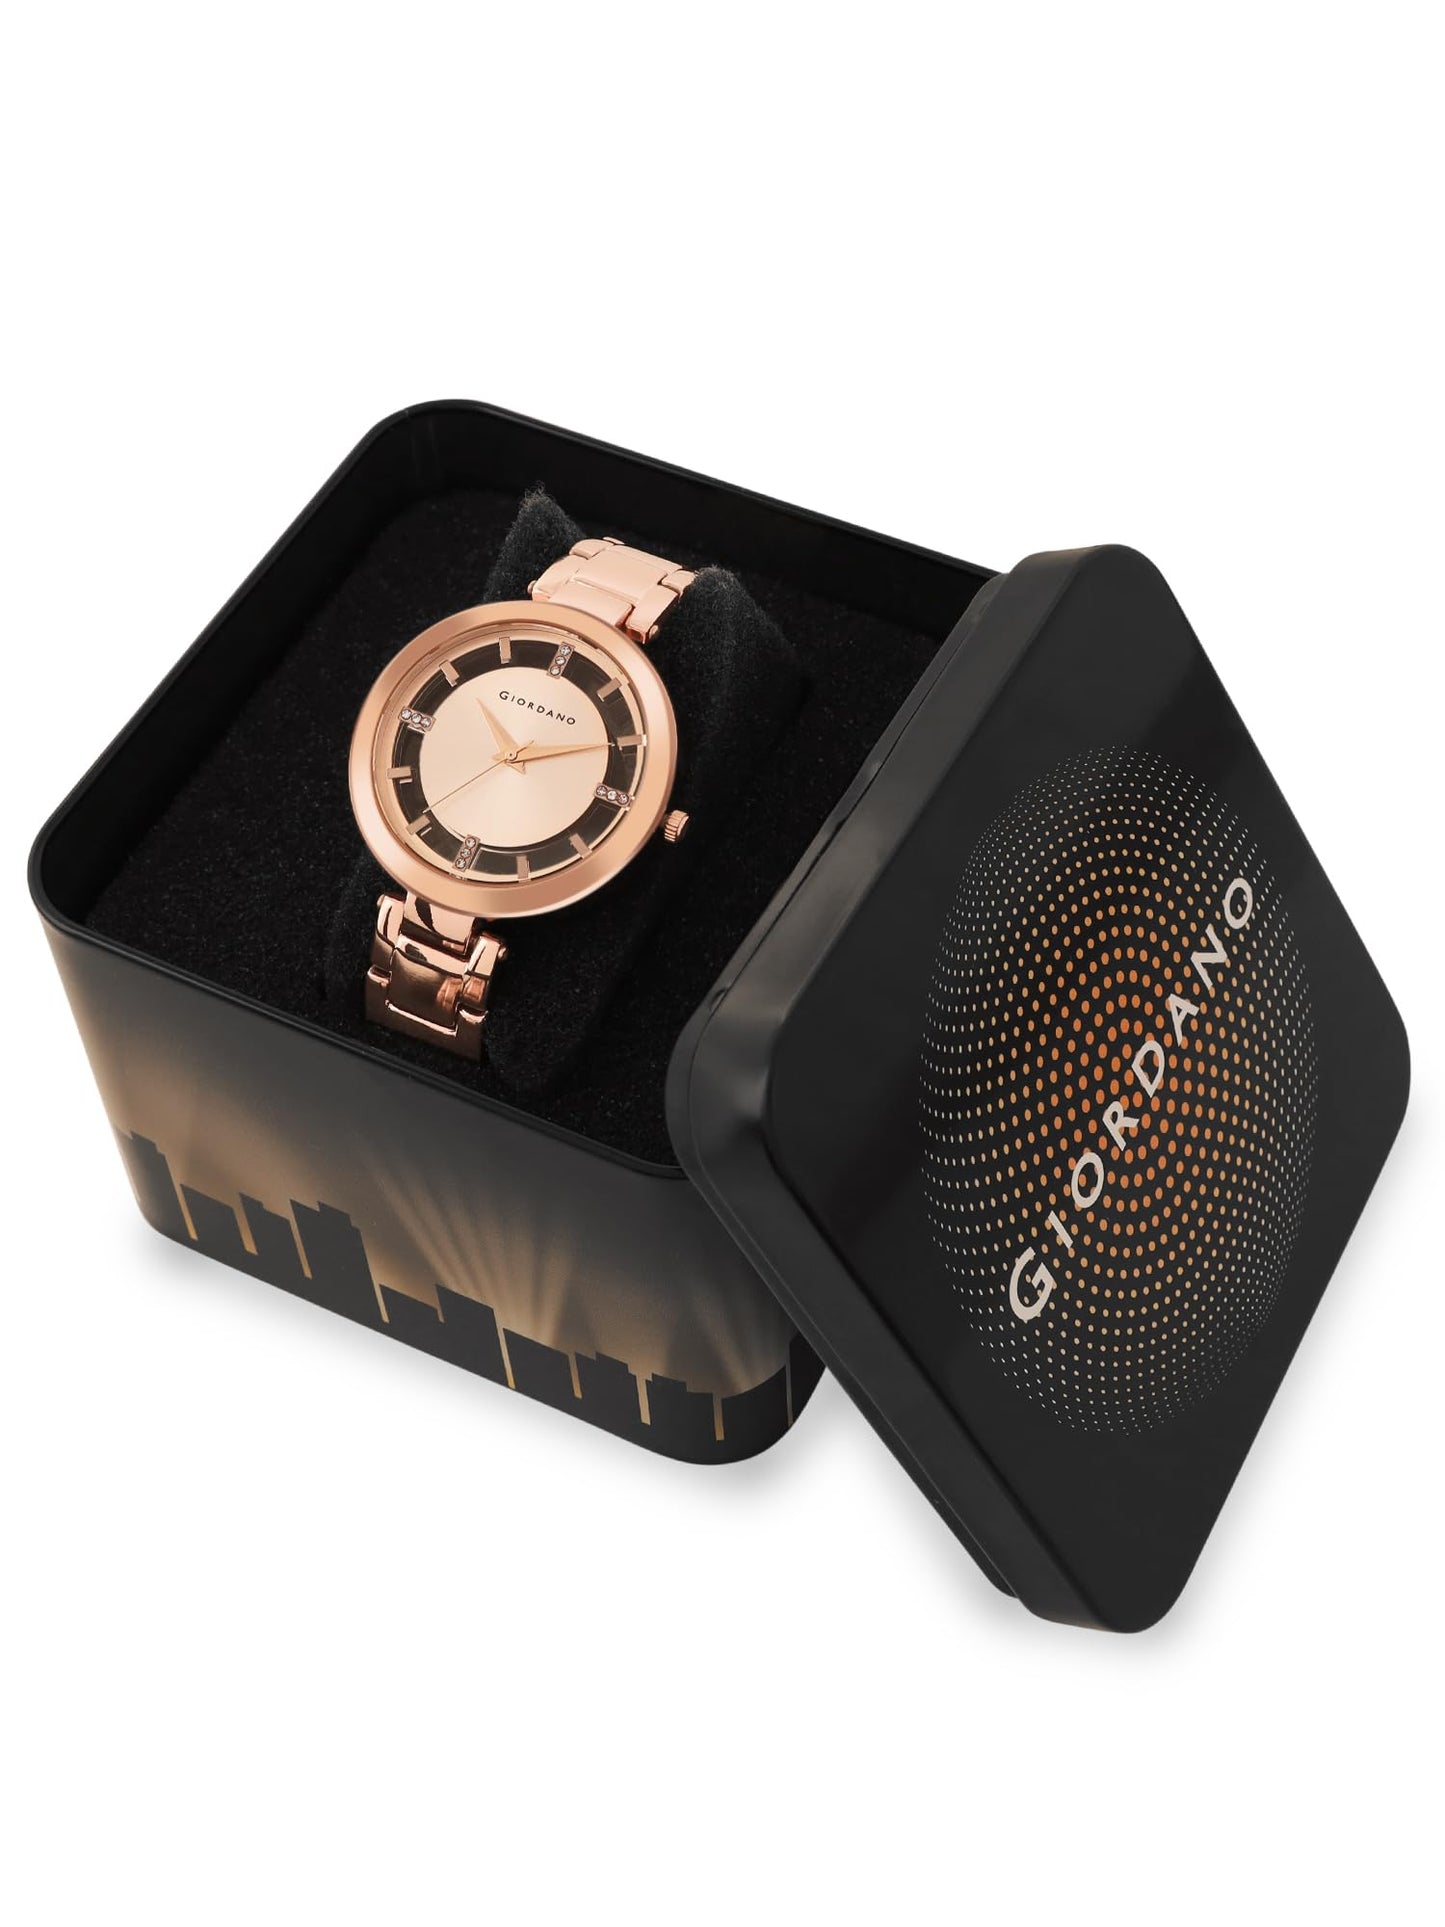 Giordano Analog Stylish | Trendy Wrist Watch for Women Water Resistant Fashion with See Through Classy Dial and Rosegold Strap|Compliment Your Look|Ideal Gift for|Ladies|Girls - GD4207